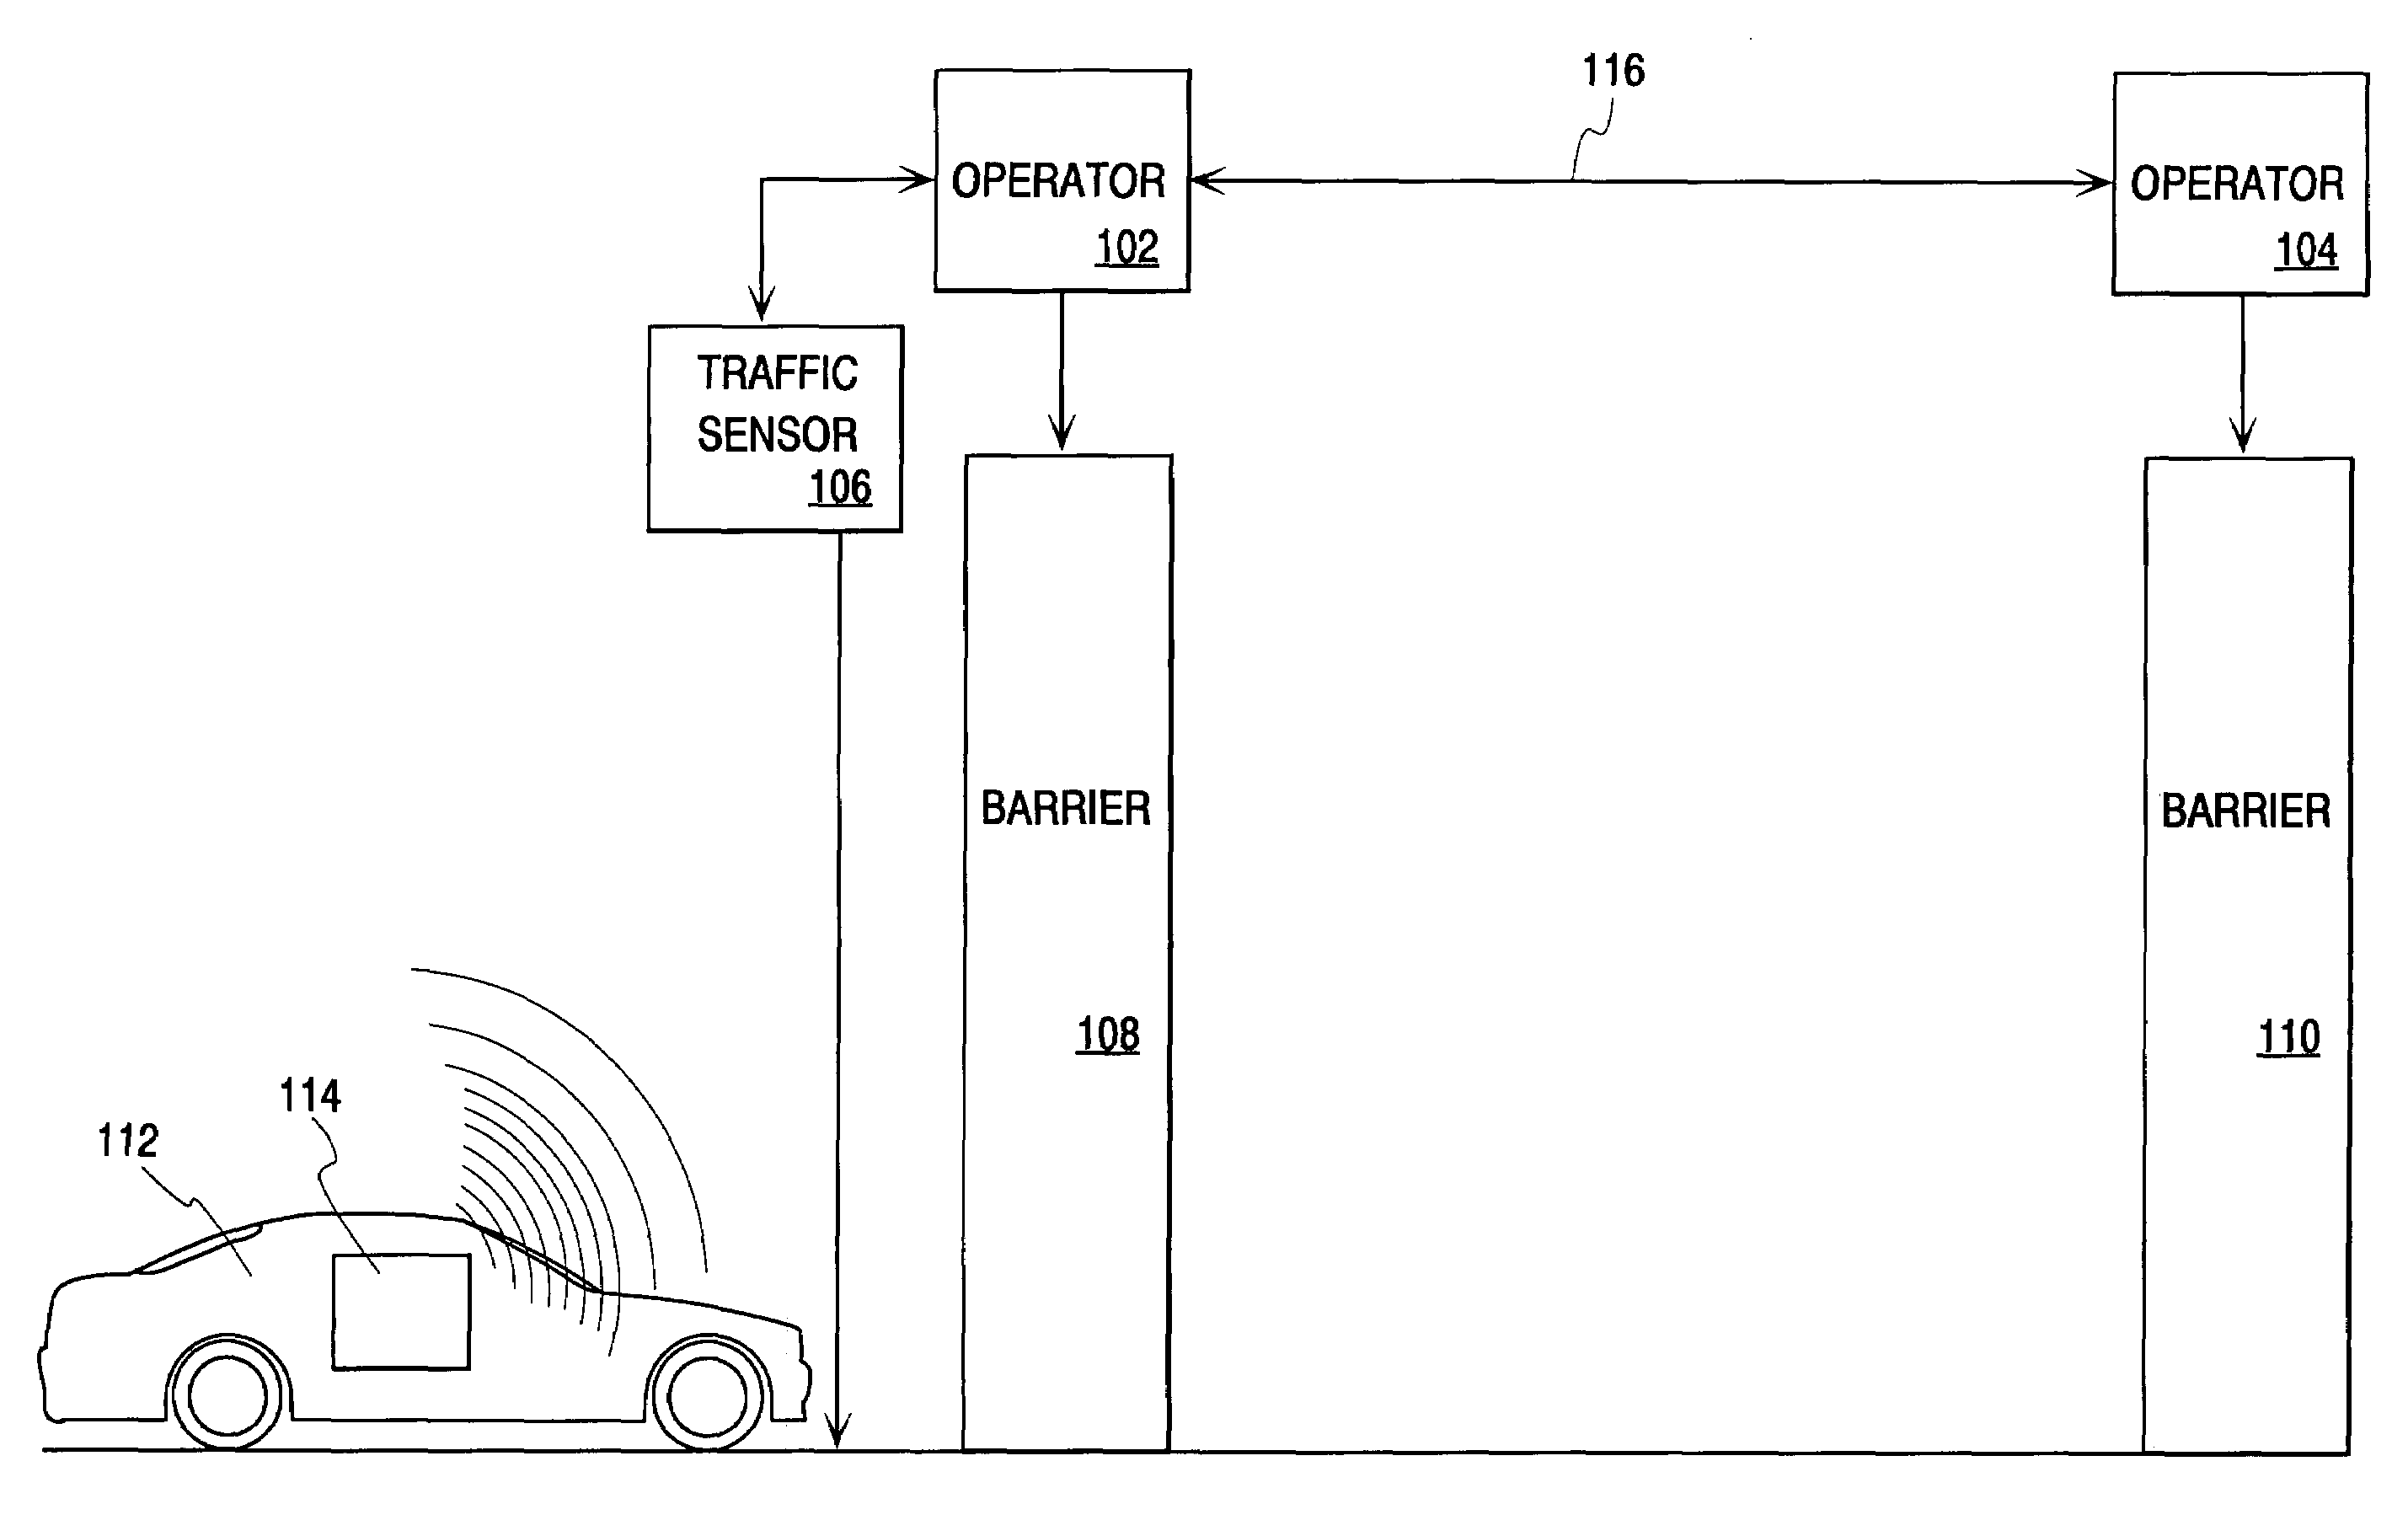 System and method for operating multiple moveable barrier operators